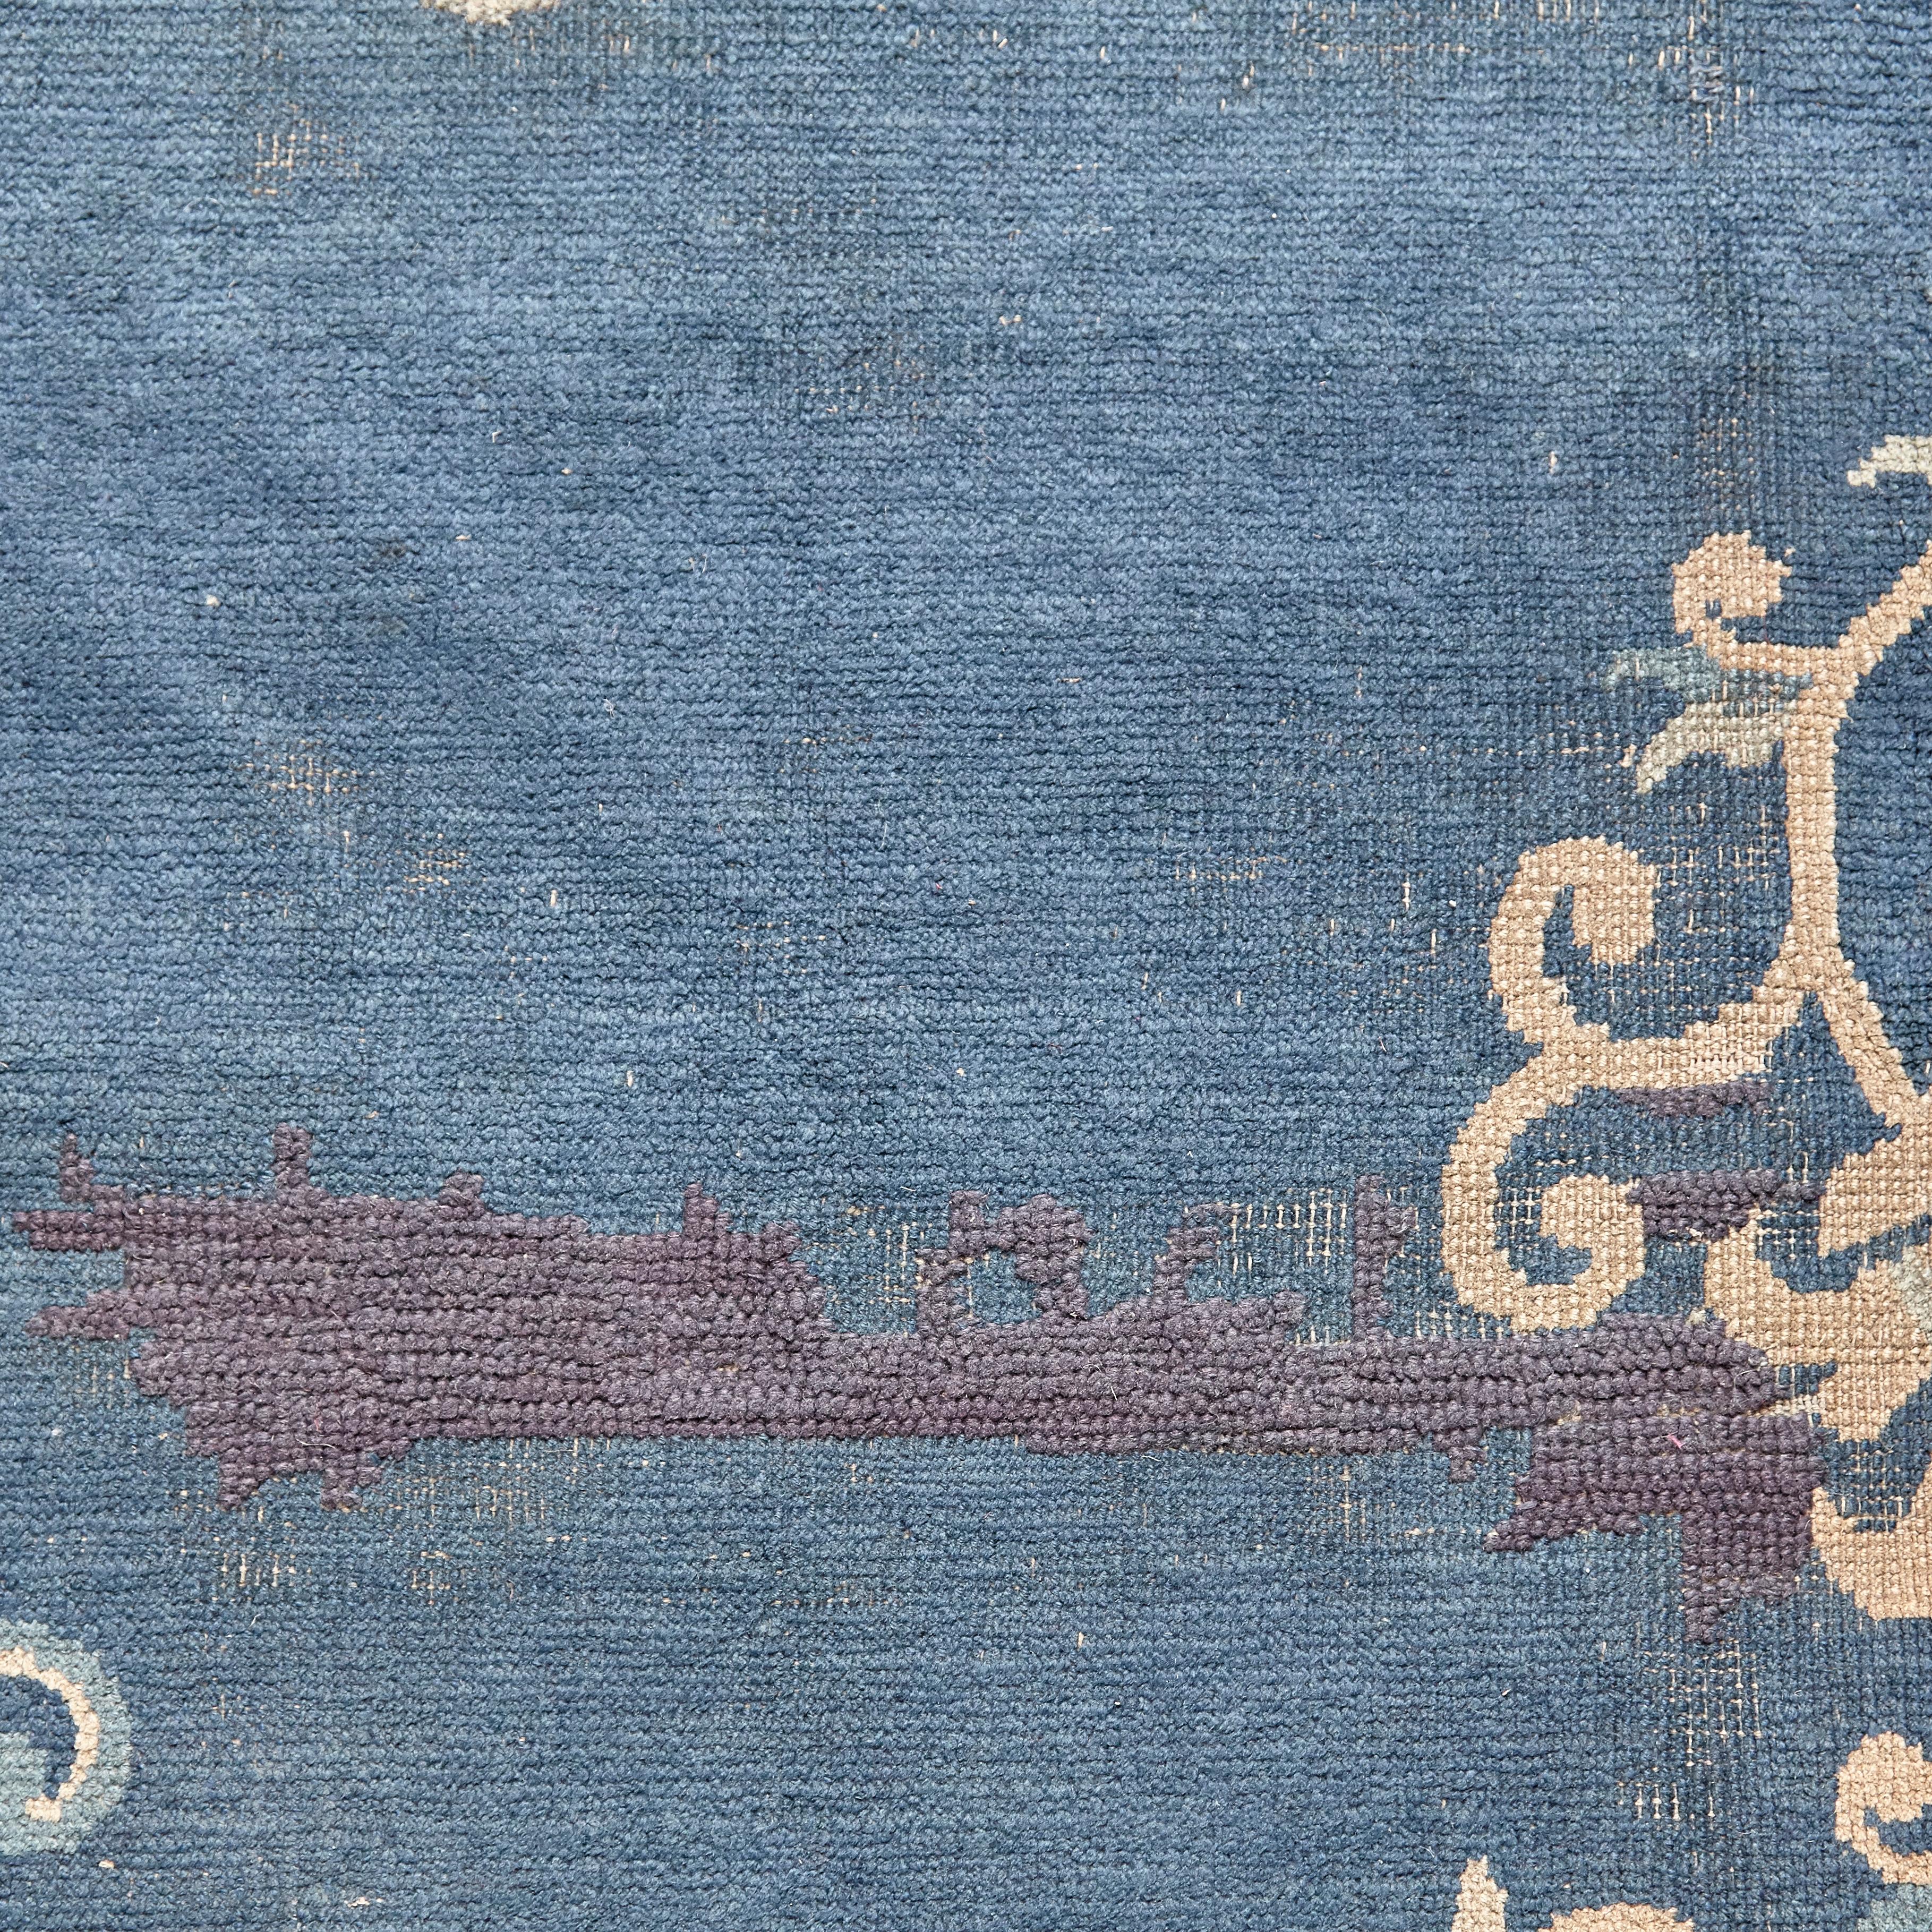 Ningshia, Chinese Export, Hand Knotted Wool, Antique Rug, circa 1920 12